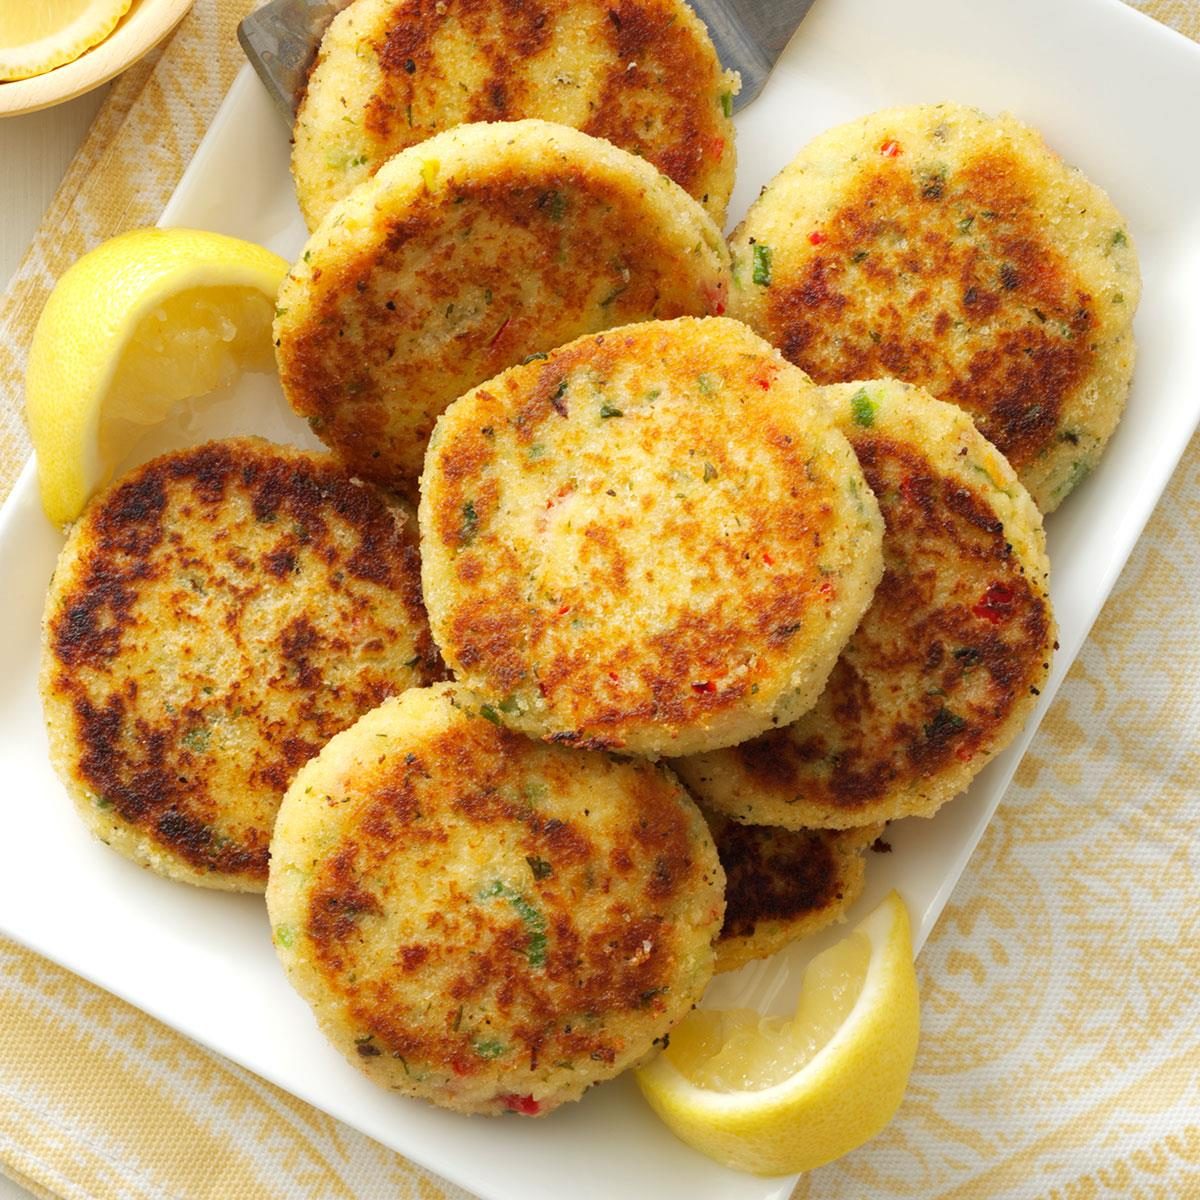 Day 23: Easy Crab Cakes